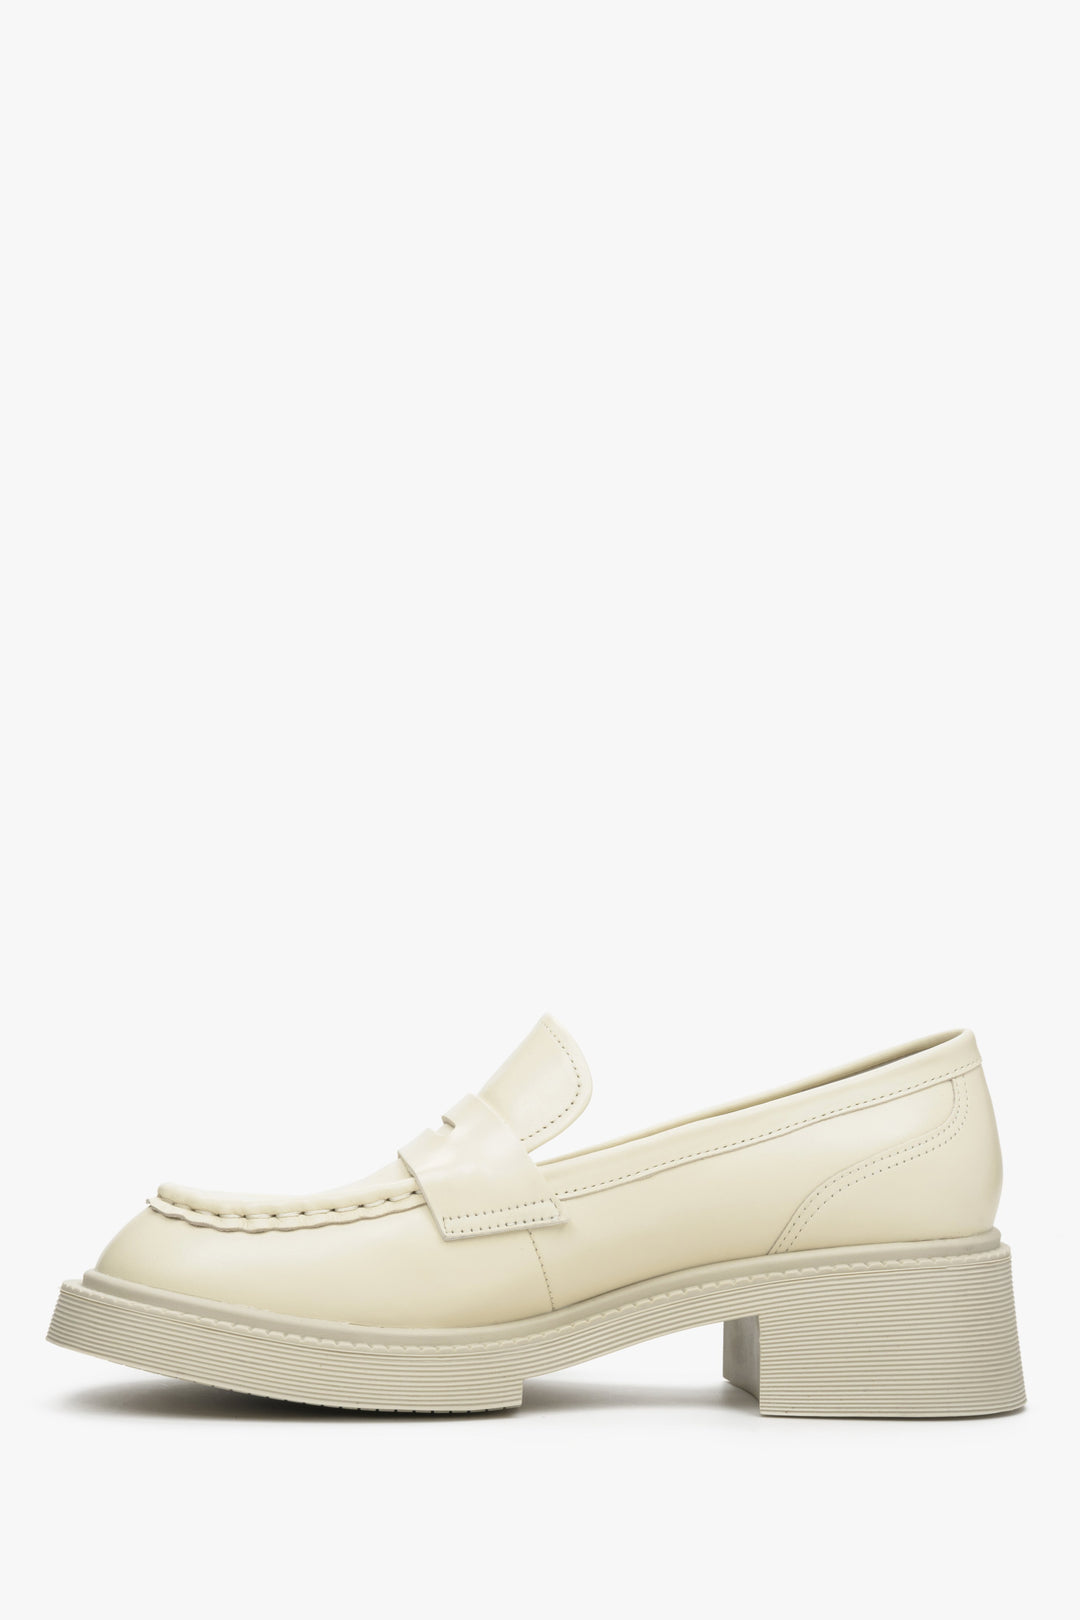 Leather, women's light beige moccasins with a stable heel - shoe profile.